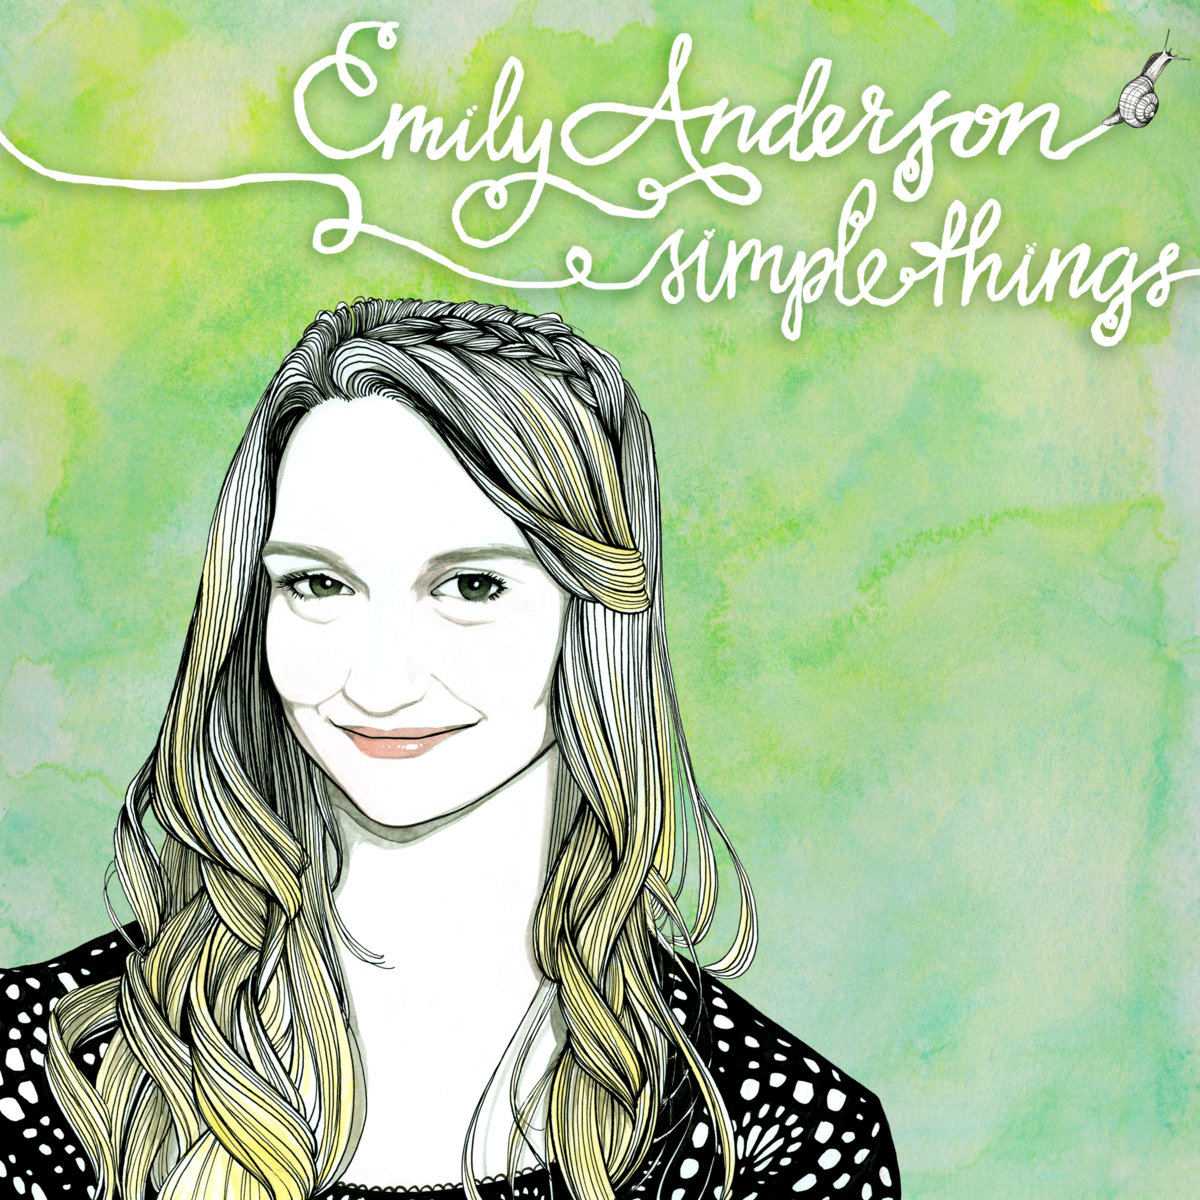 Emily Anderson's "Simple Things"